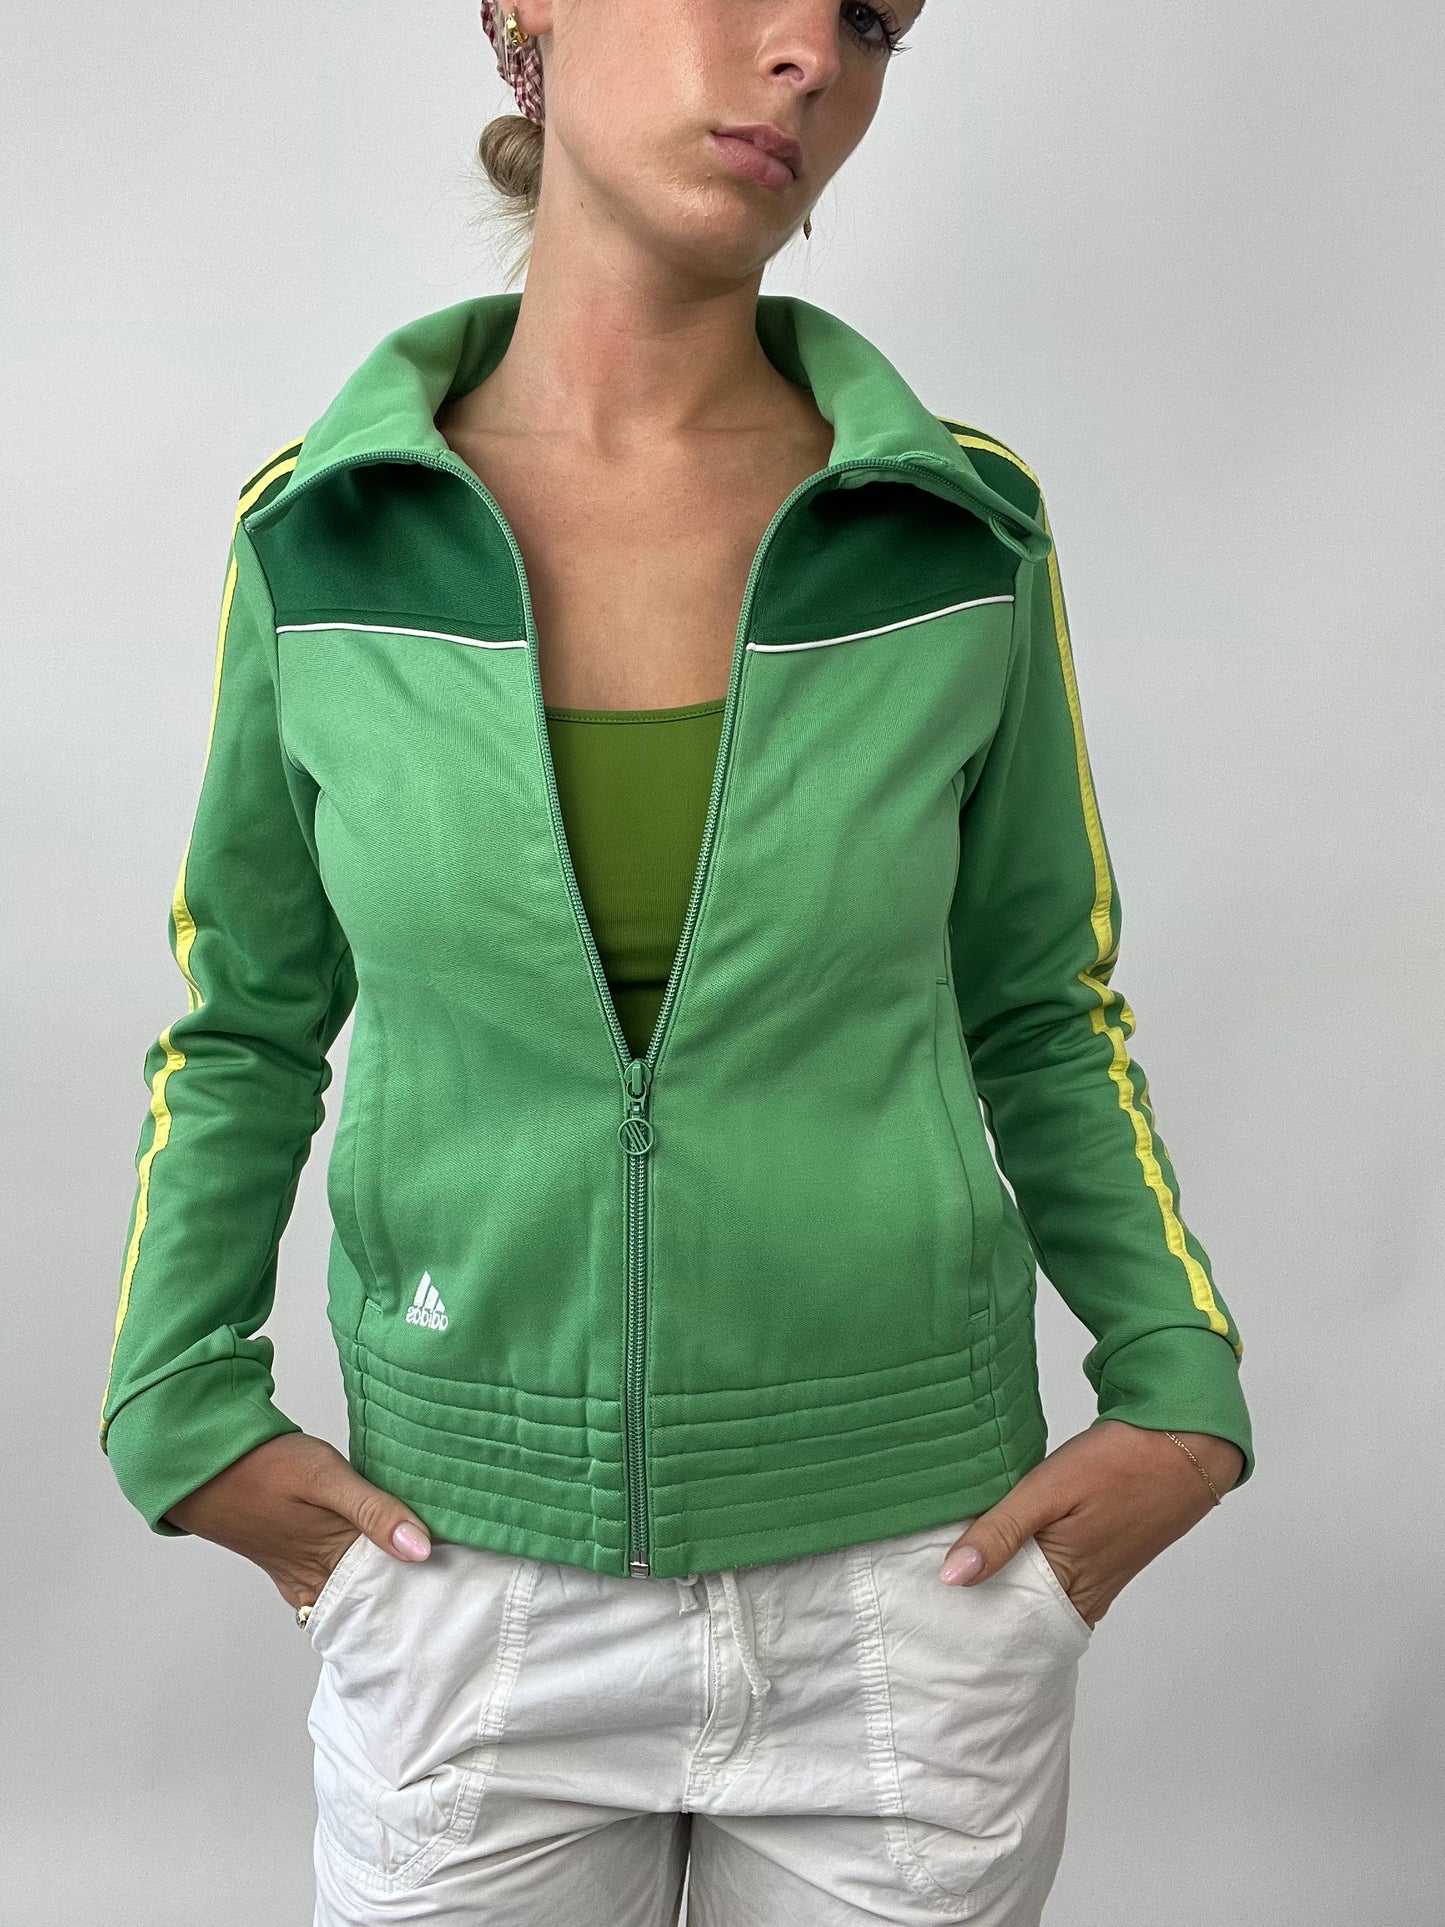 PUB GARDEN DROP | small green and yellow vintage adidas zip up